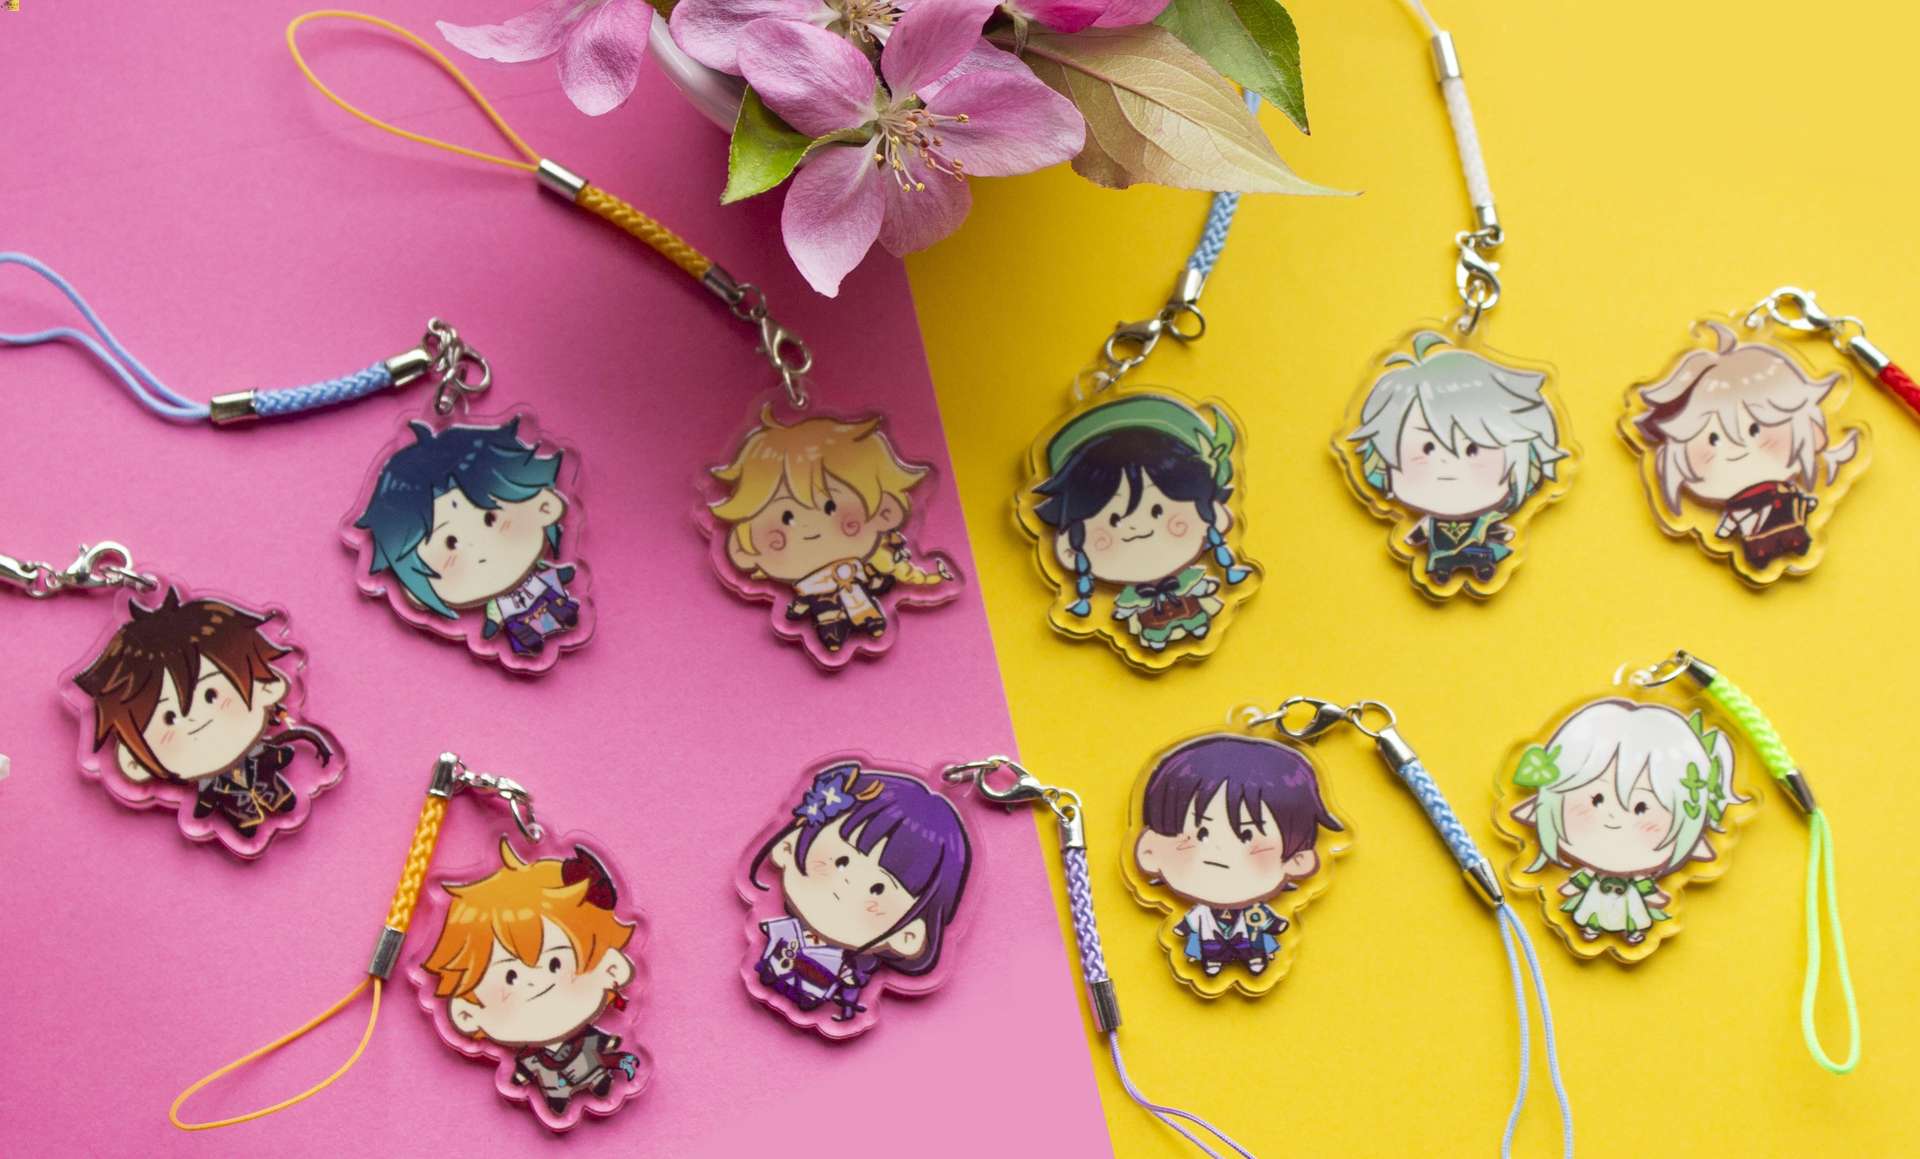 anime-inspired-crafts-crafting-phone-charms-with-anime-themes